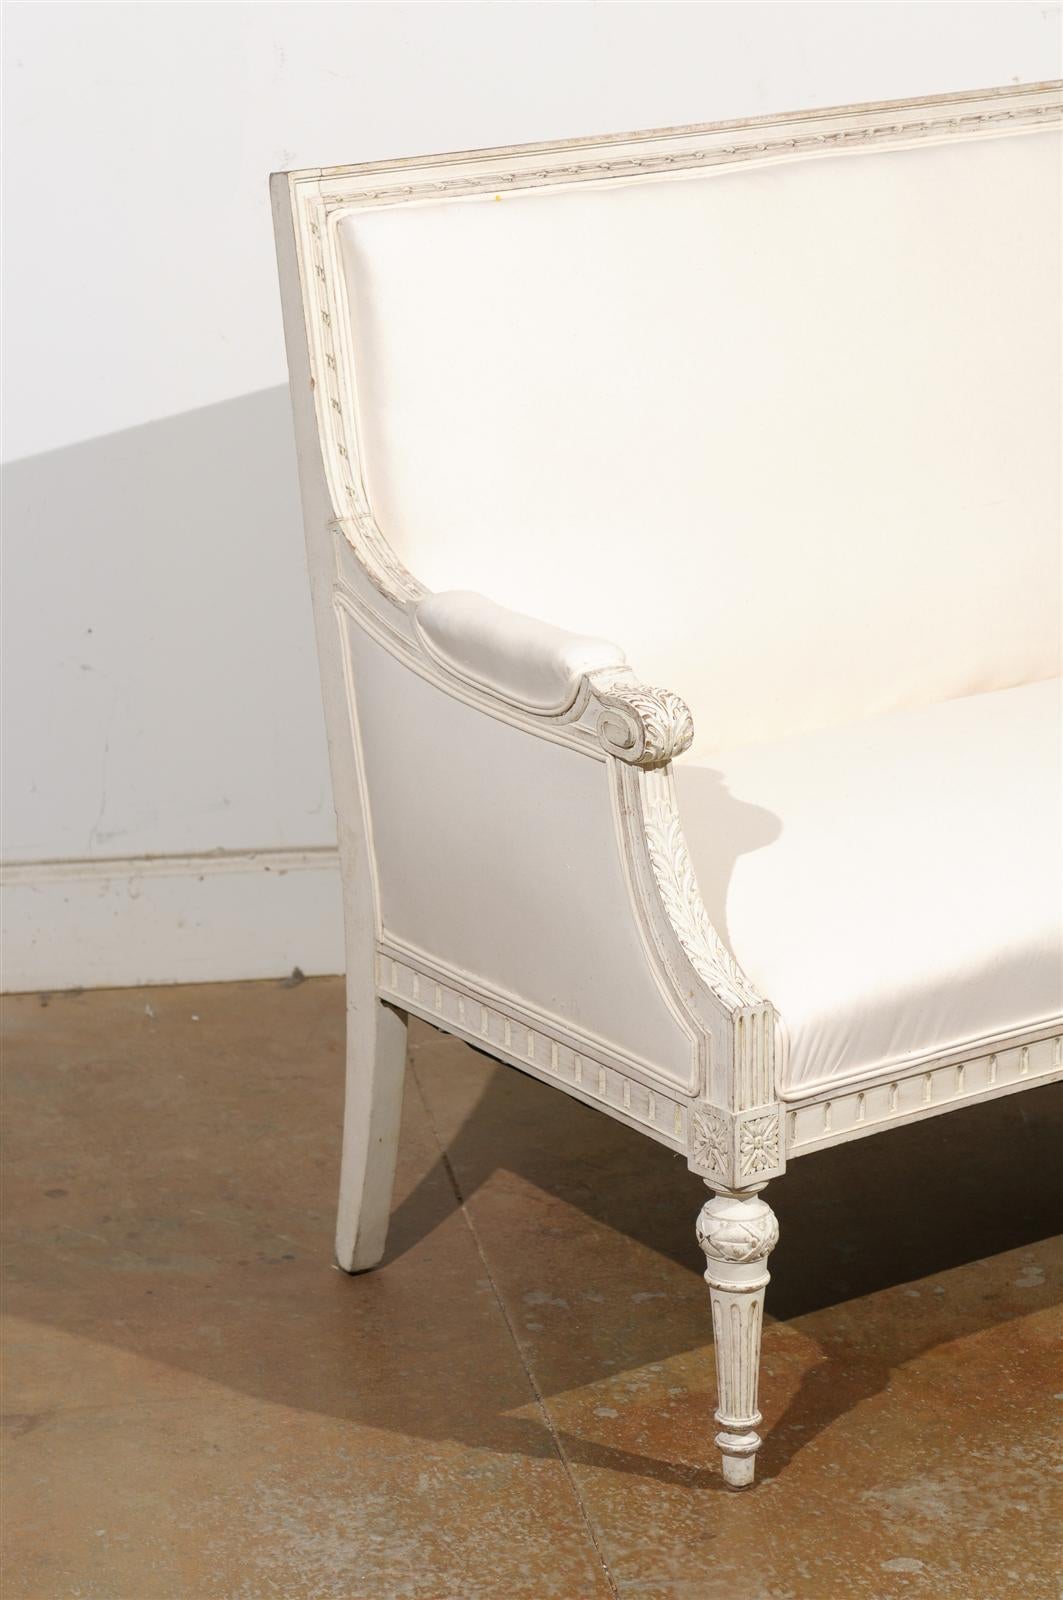 19th Century Swedish Neoclassical Revival Two-Seat Carved and Painted Sofa, circa 1880